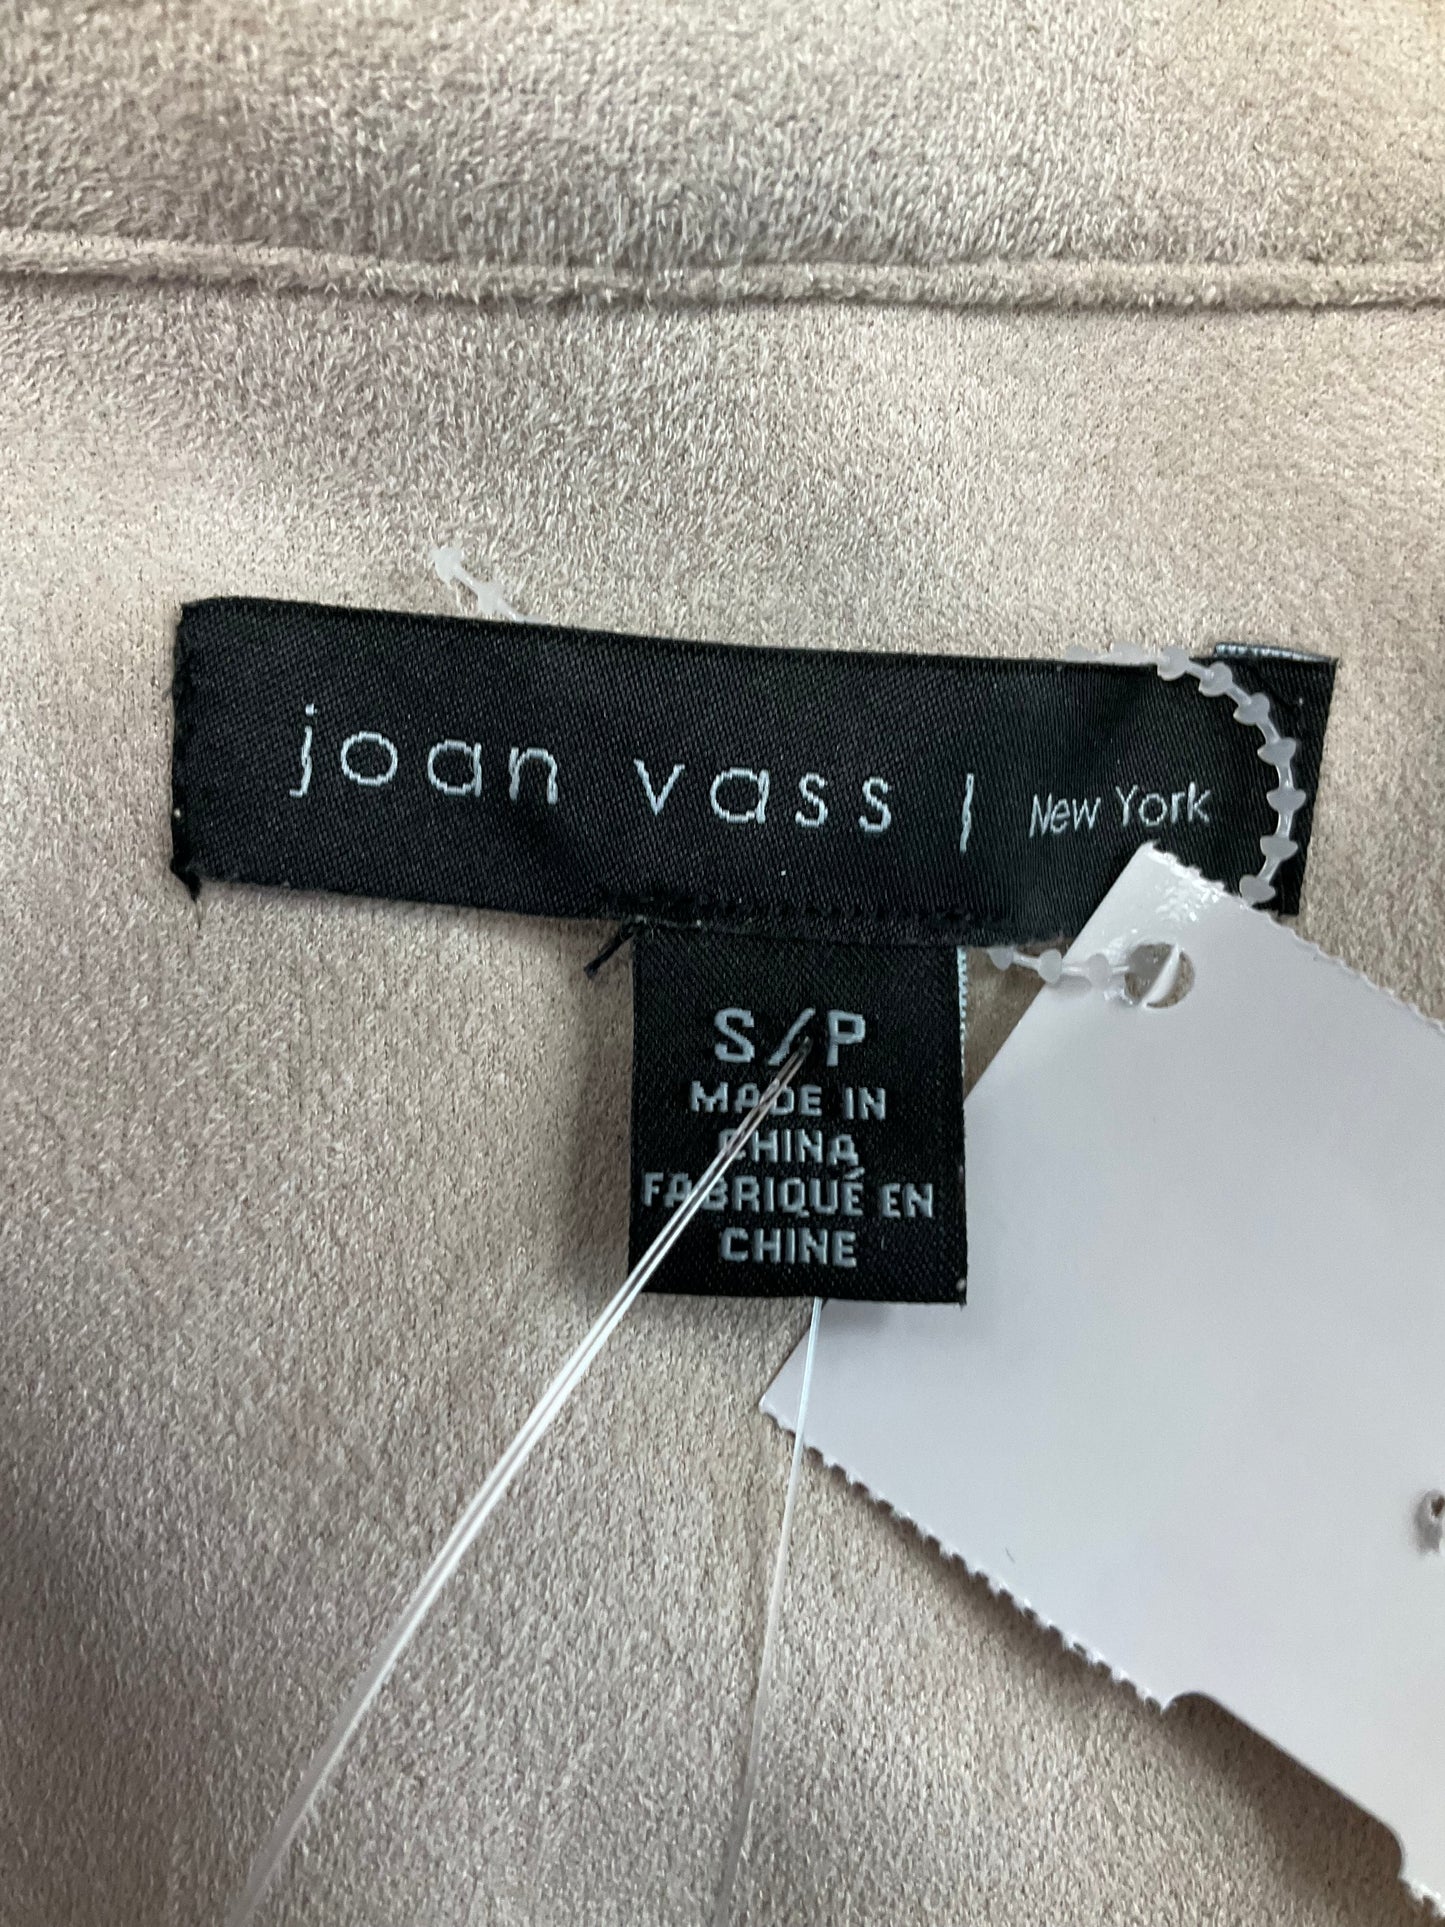 Jacket Other By Joan Vass  Size: S